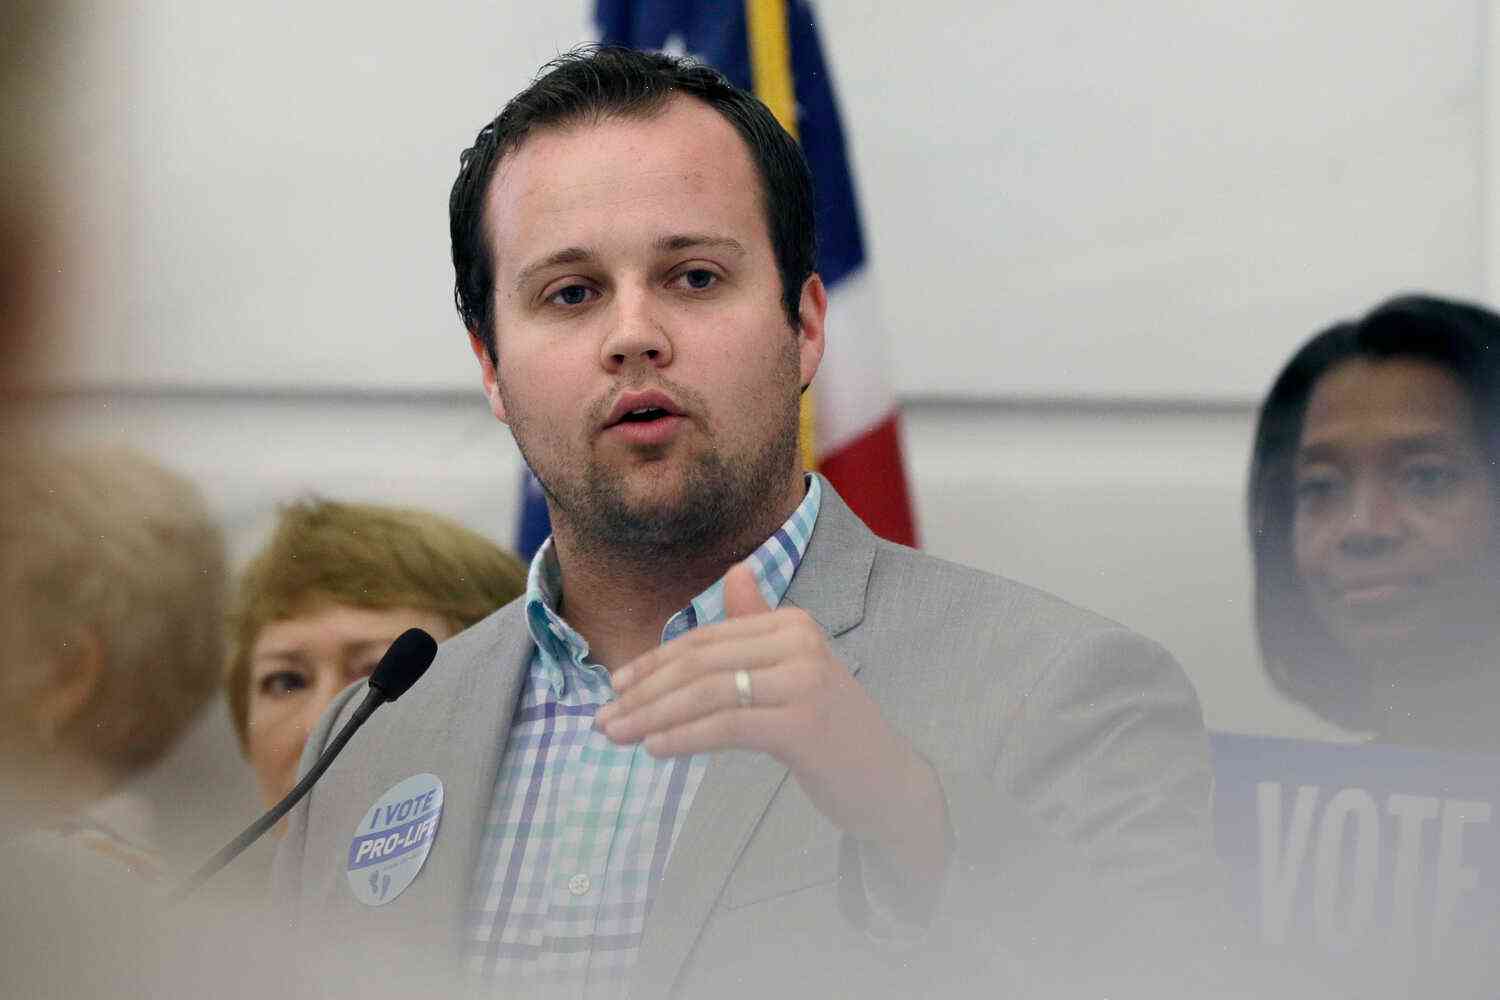 Do you know who Josh Duggar is? He’s now on trial for child porn.